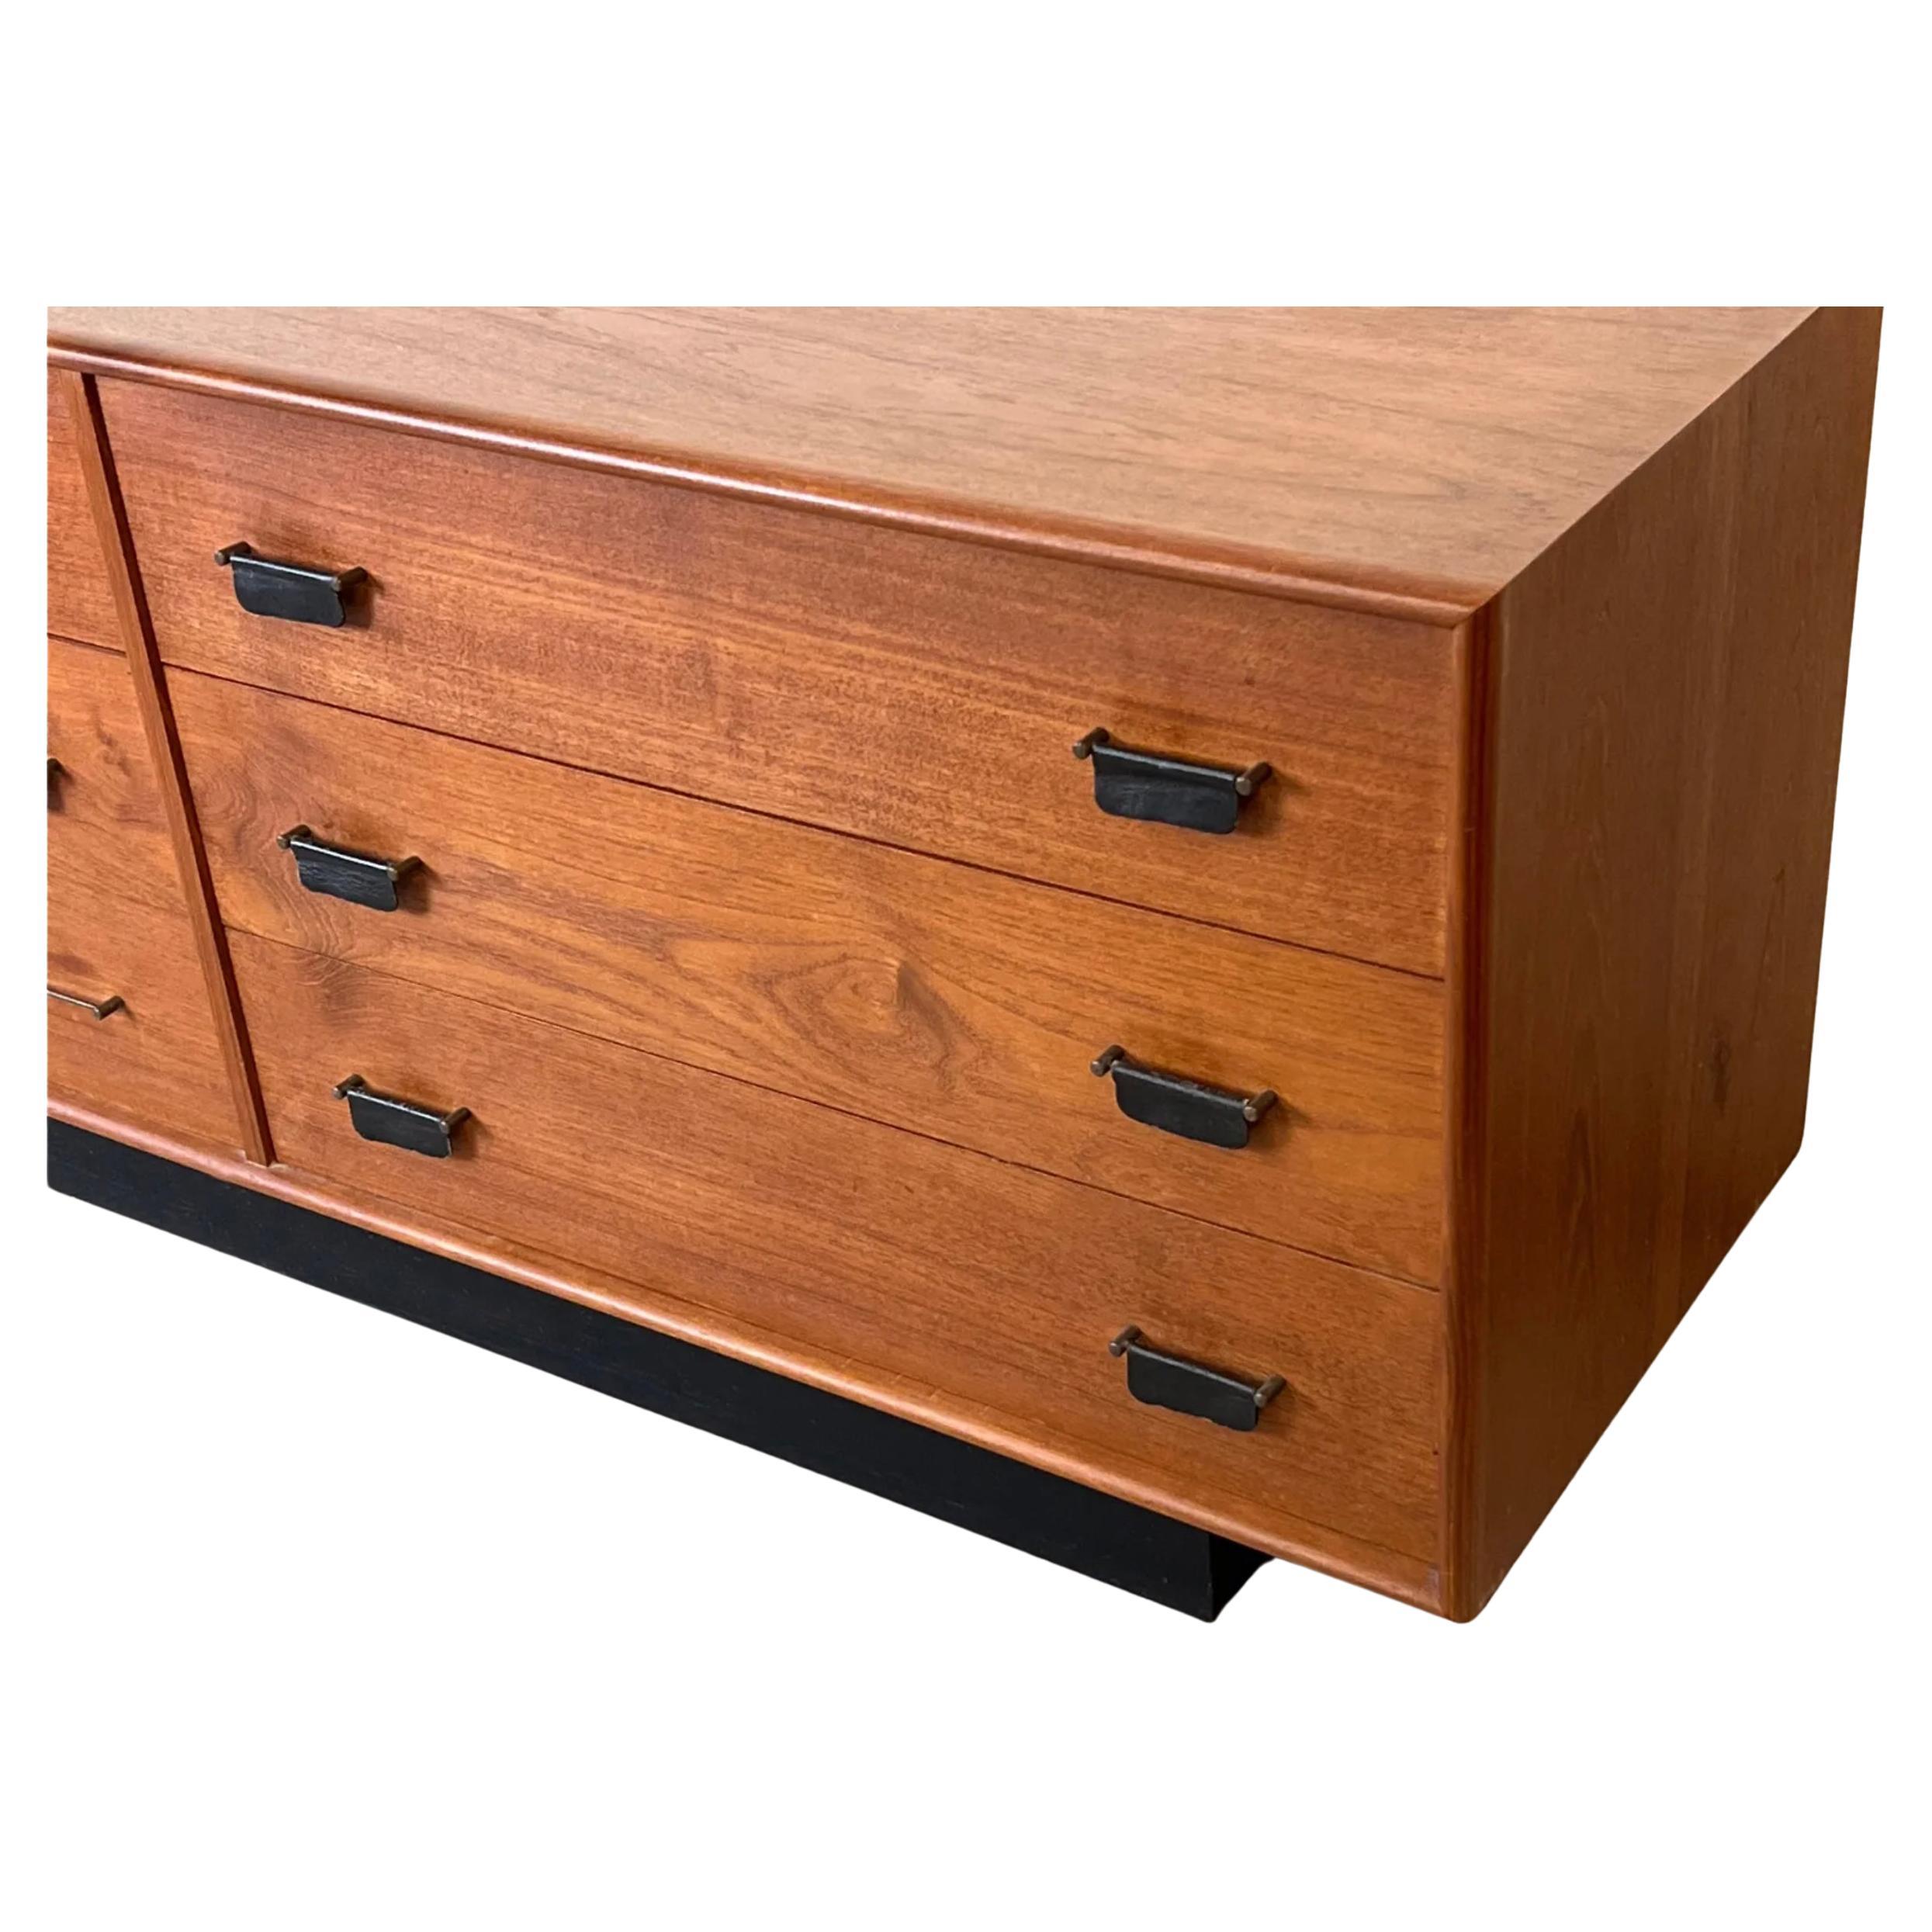 Mid-Century Modern Mid Century Modern Teak low 6 drawer dresser with leather pulls and plinth base For Sale